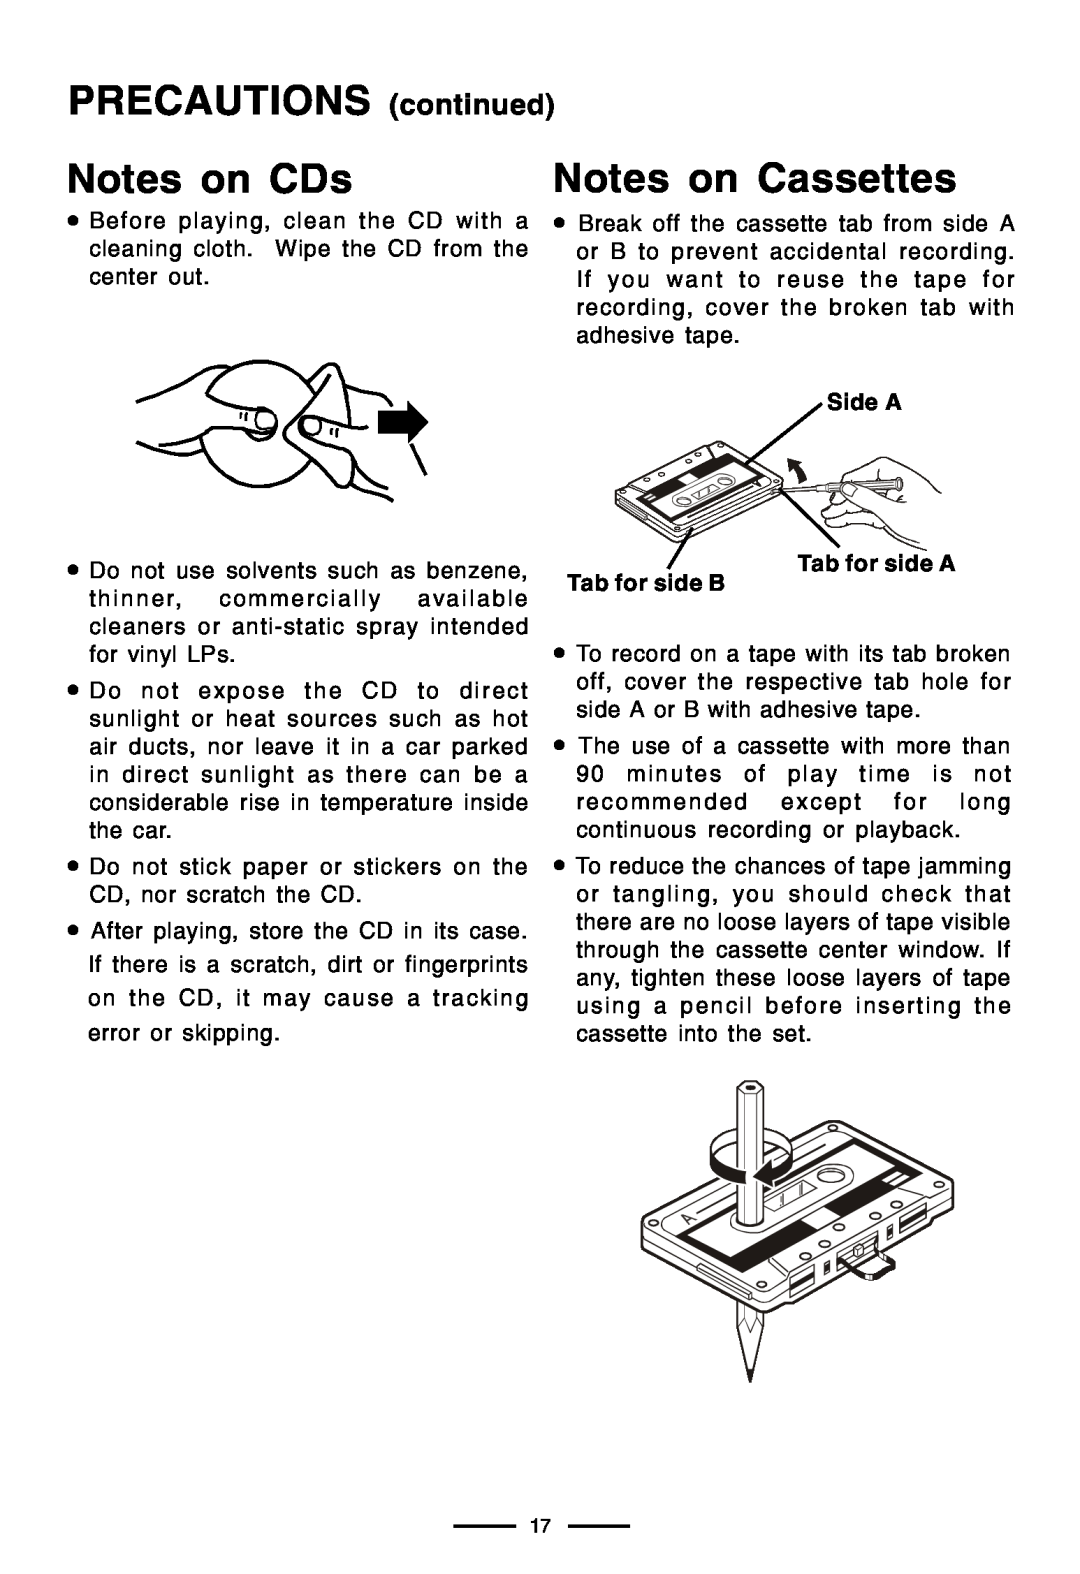 Lenoxx Electronics CD-210 manual PRECAUTIONS continued, Notes on CDs, Notes on Cassettes 